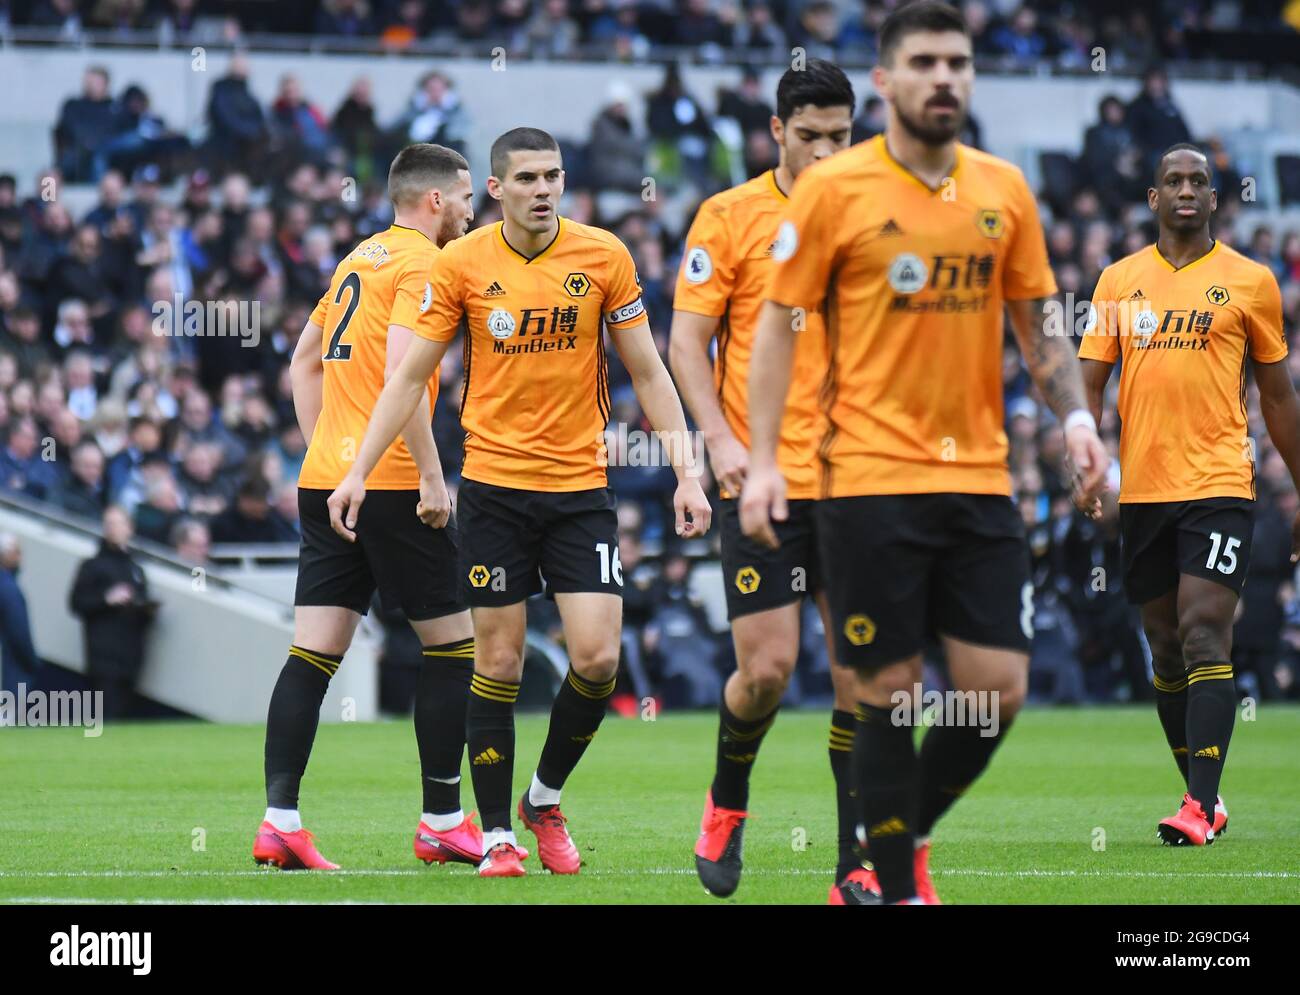 LONDON, ENGLAND - MArch 1, 2020: Conor Coady of Wolverhampton during the 2020/21 Premier League game between Tottenham Hotspur FC and Wolverhampton FC at Tottenham Hotspur Stadium. Stock Photo